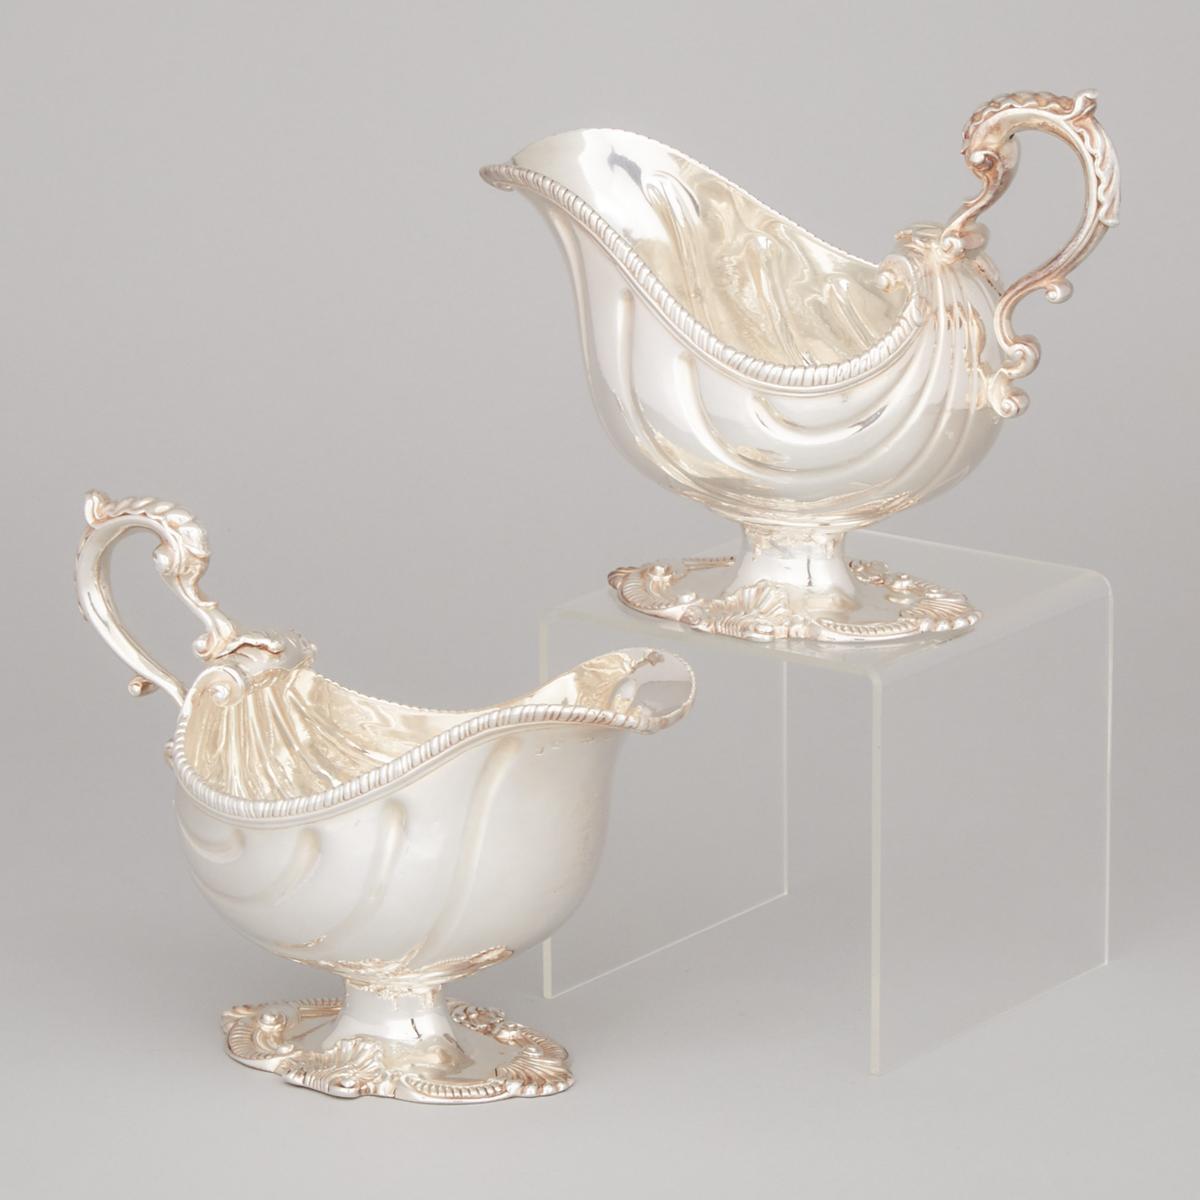 Pair of George II Silver Sauce Boats, Thomas Heming, London, 1758, length 8.7 in — 22 cm (2 Pieces)